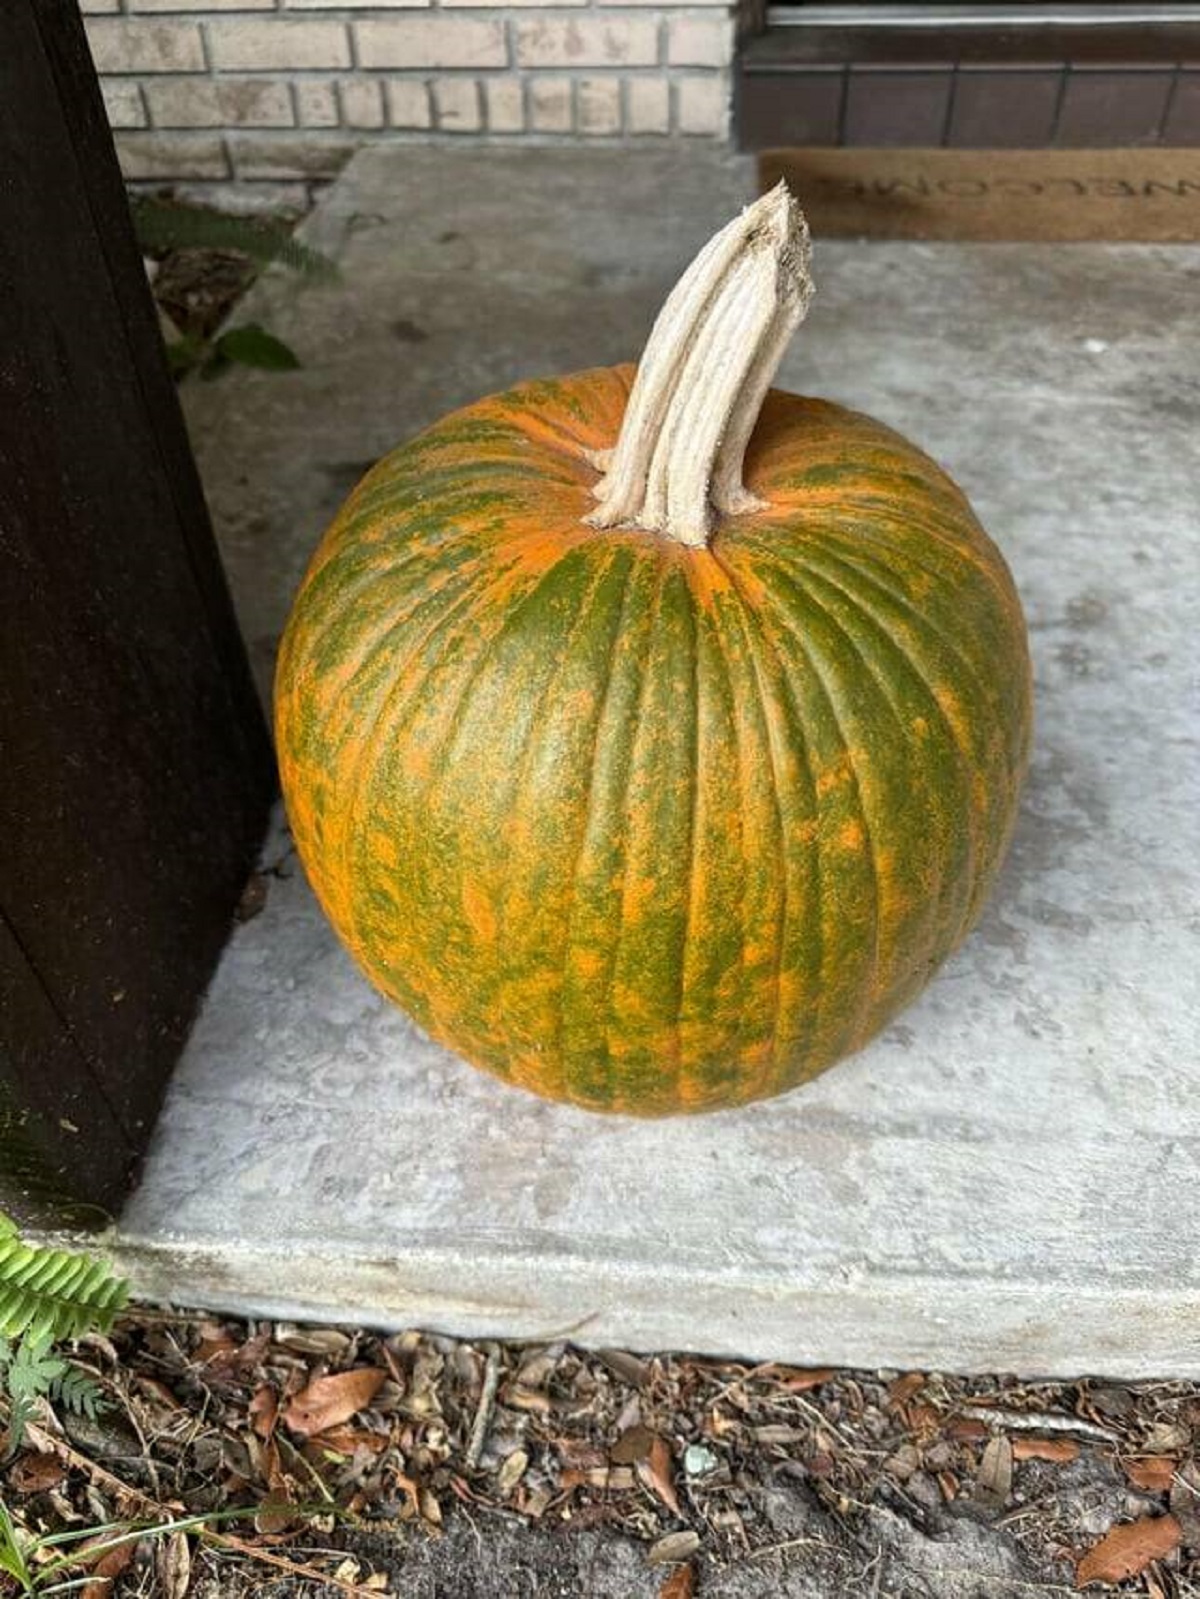 "My pumpkin from October 2023 has not rotted as of late May 202"